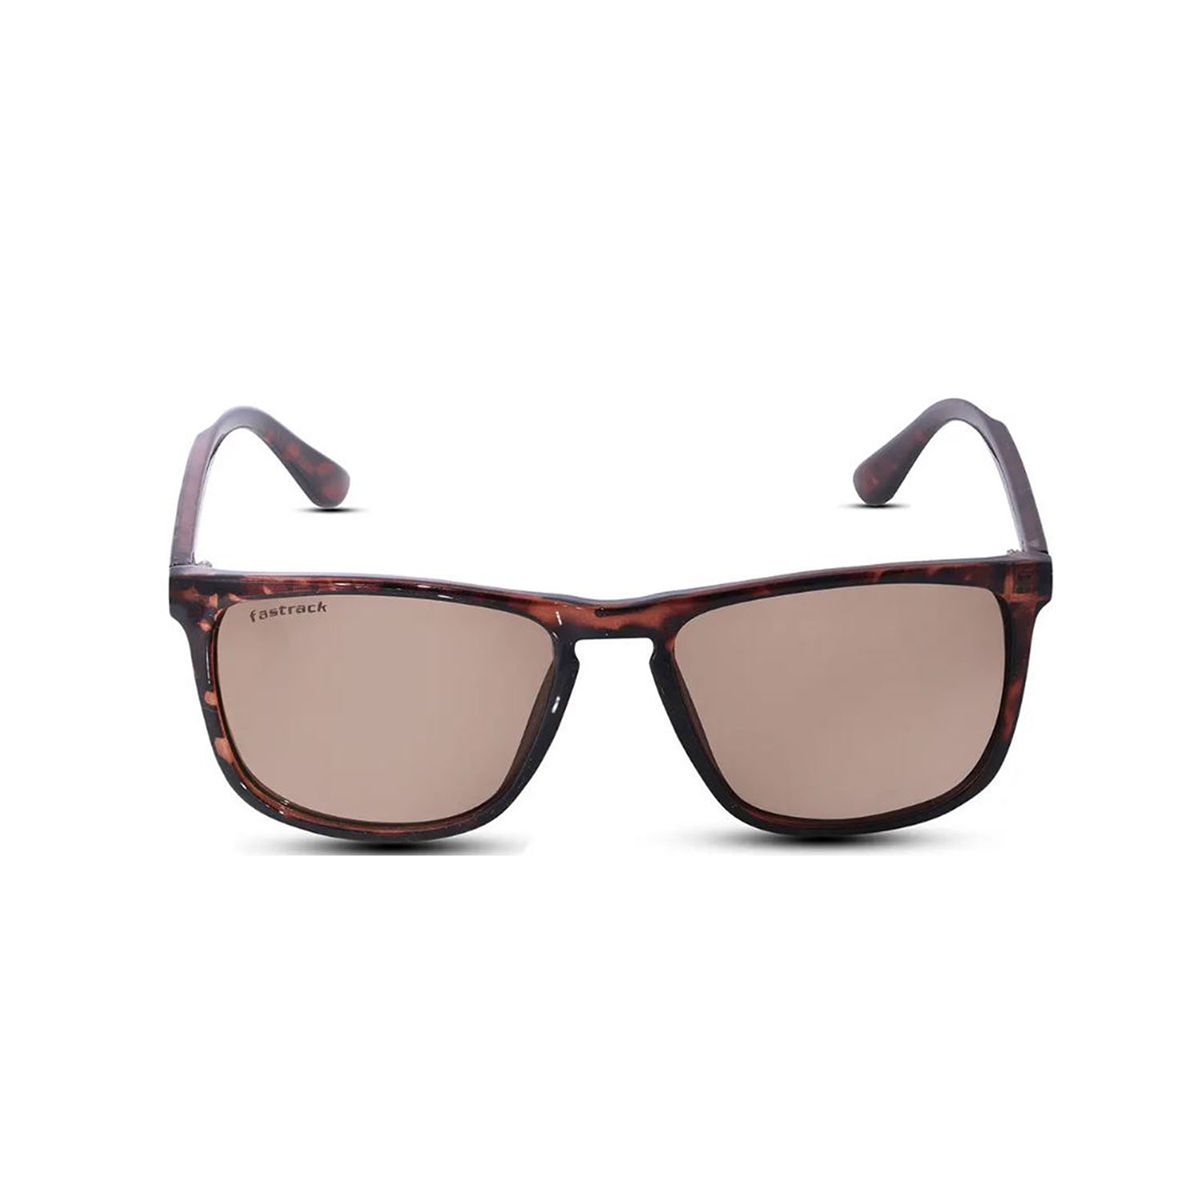 2023 Designer Cat Eye Sunglasses Outlet High Quality Composite Metal Frames  For Travel And Sports With UV400 Protection From Pydbusiness, $24.89 |  DHgate.Com